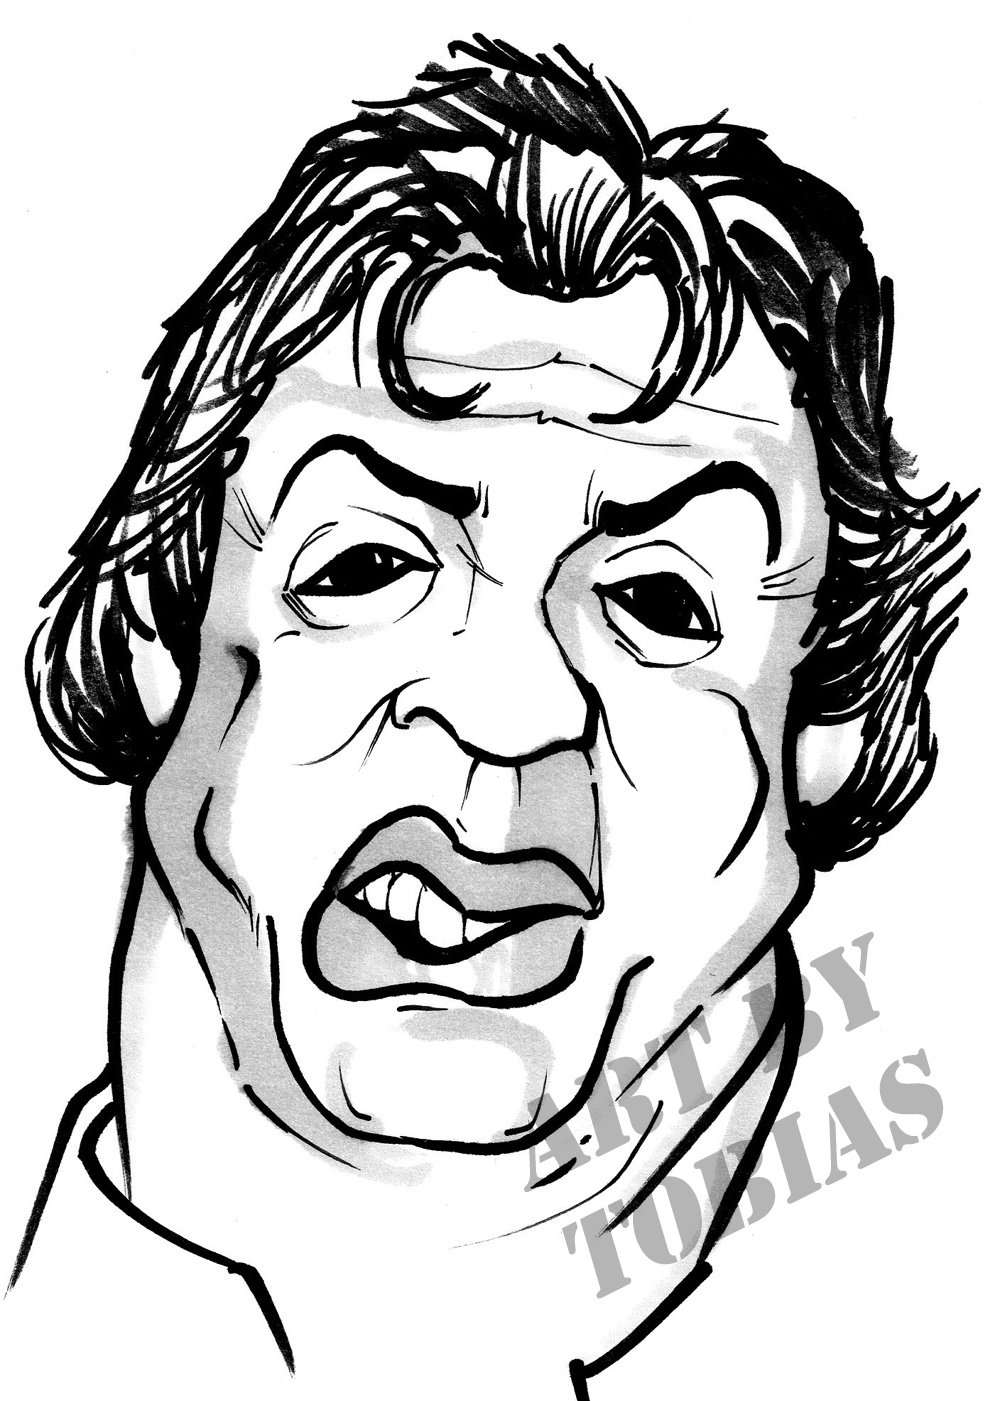 Dessins ou caricatures - Page 18 Stallone+copy